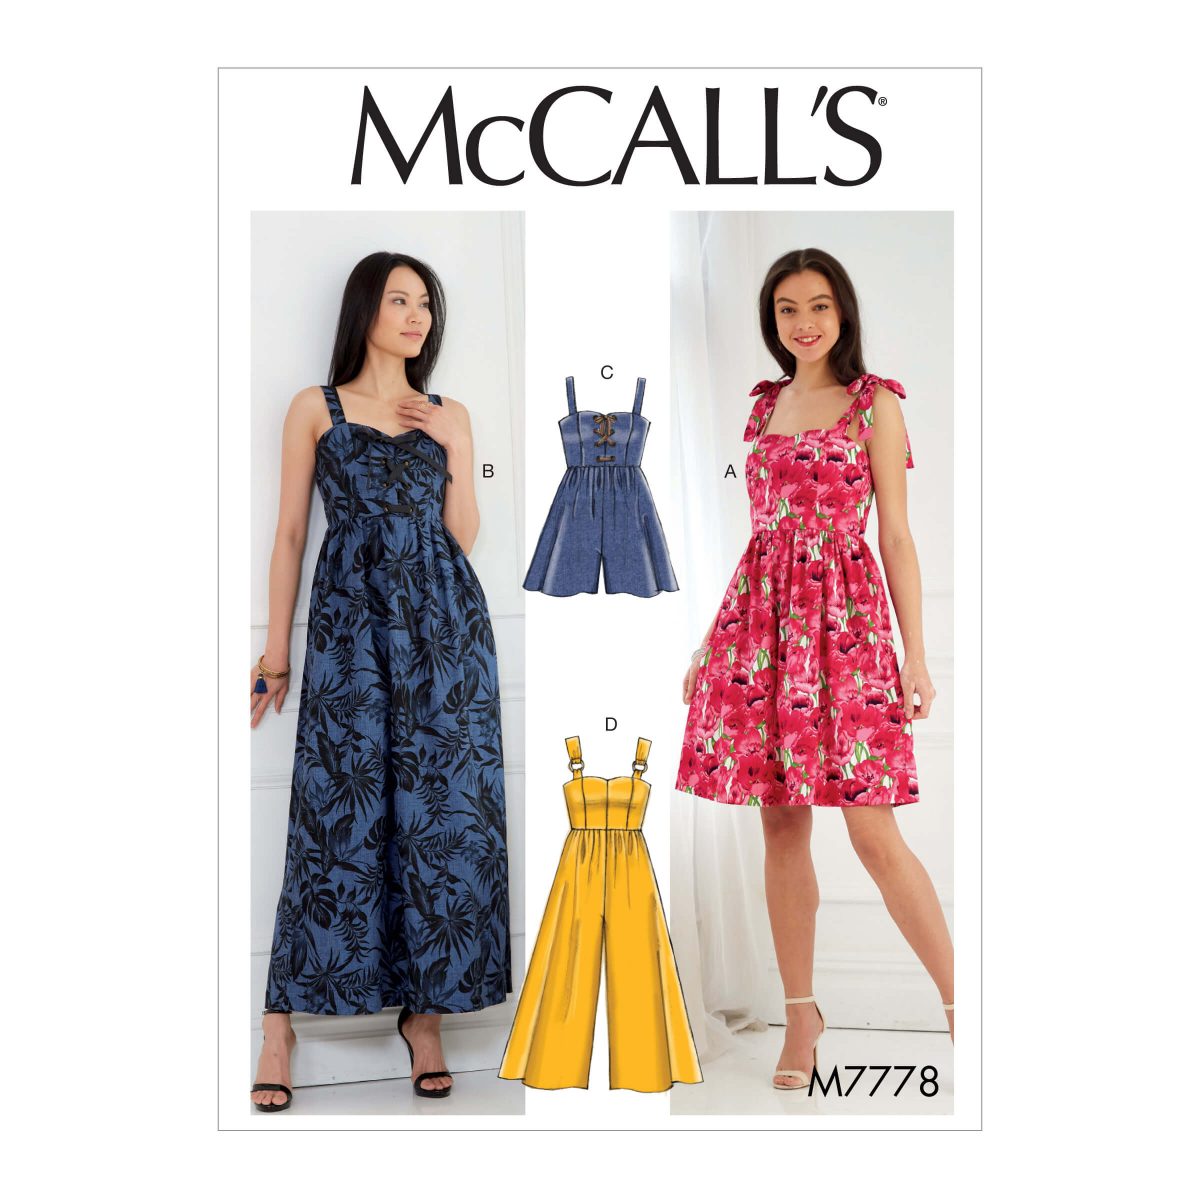 McCall's Sewing Pattern M7778 Misses' Dresses, Romper and Jumpsuit